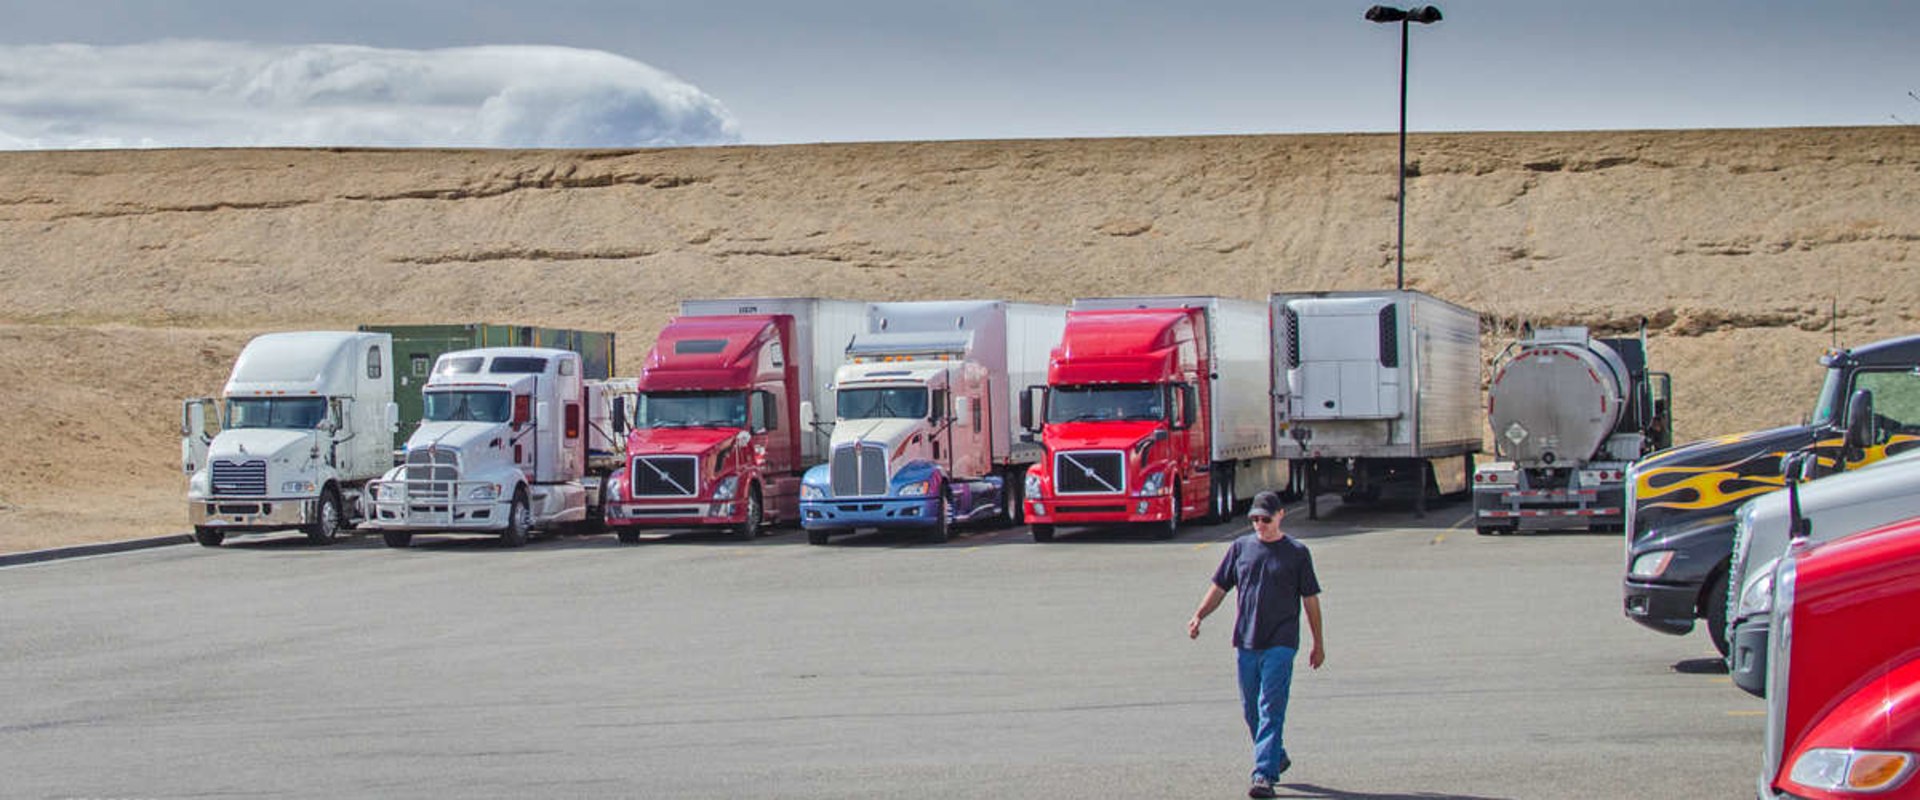 What is a trucking company for?